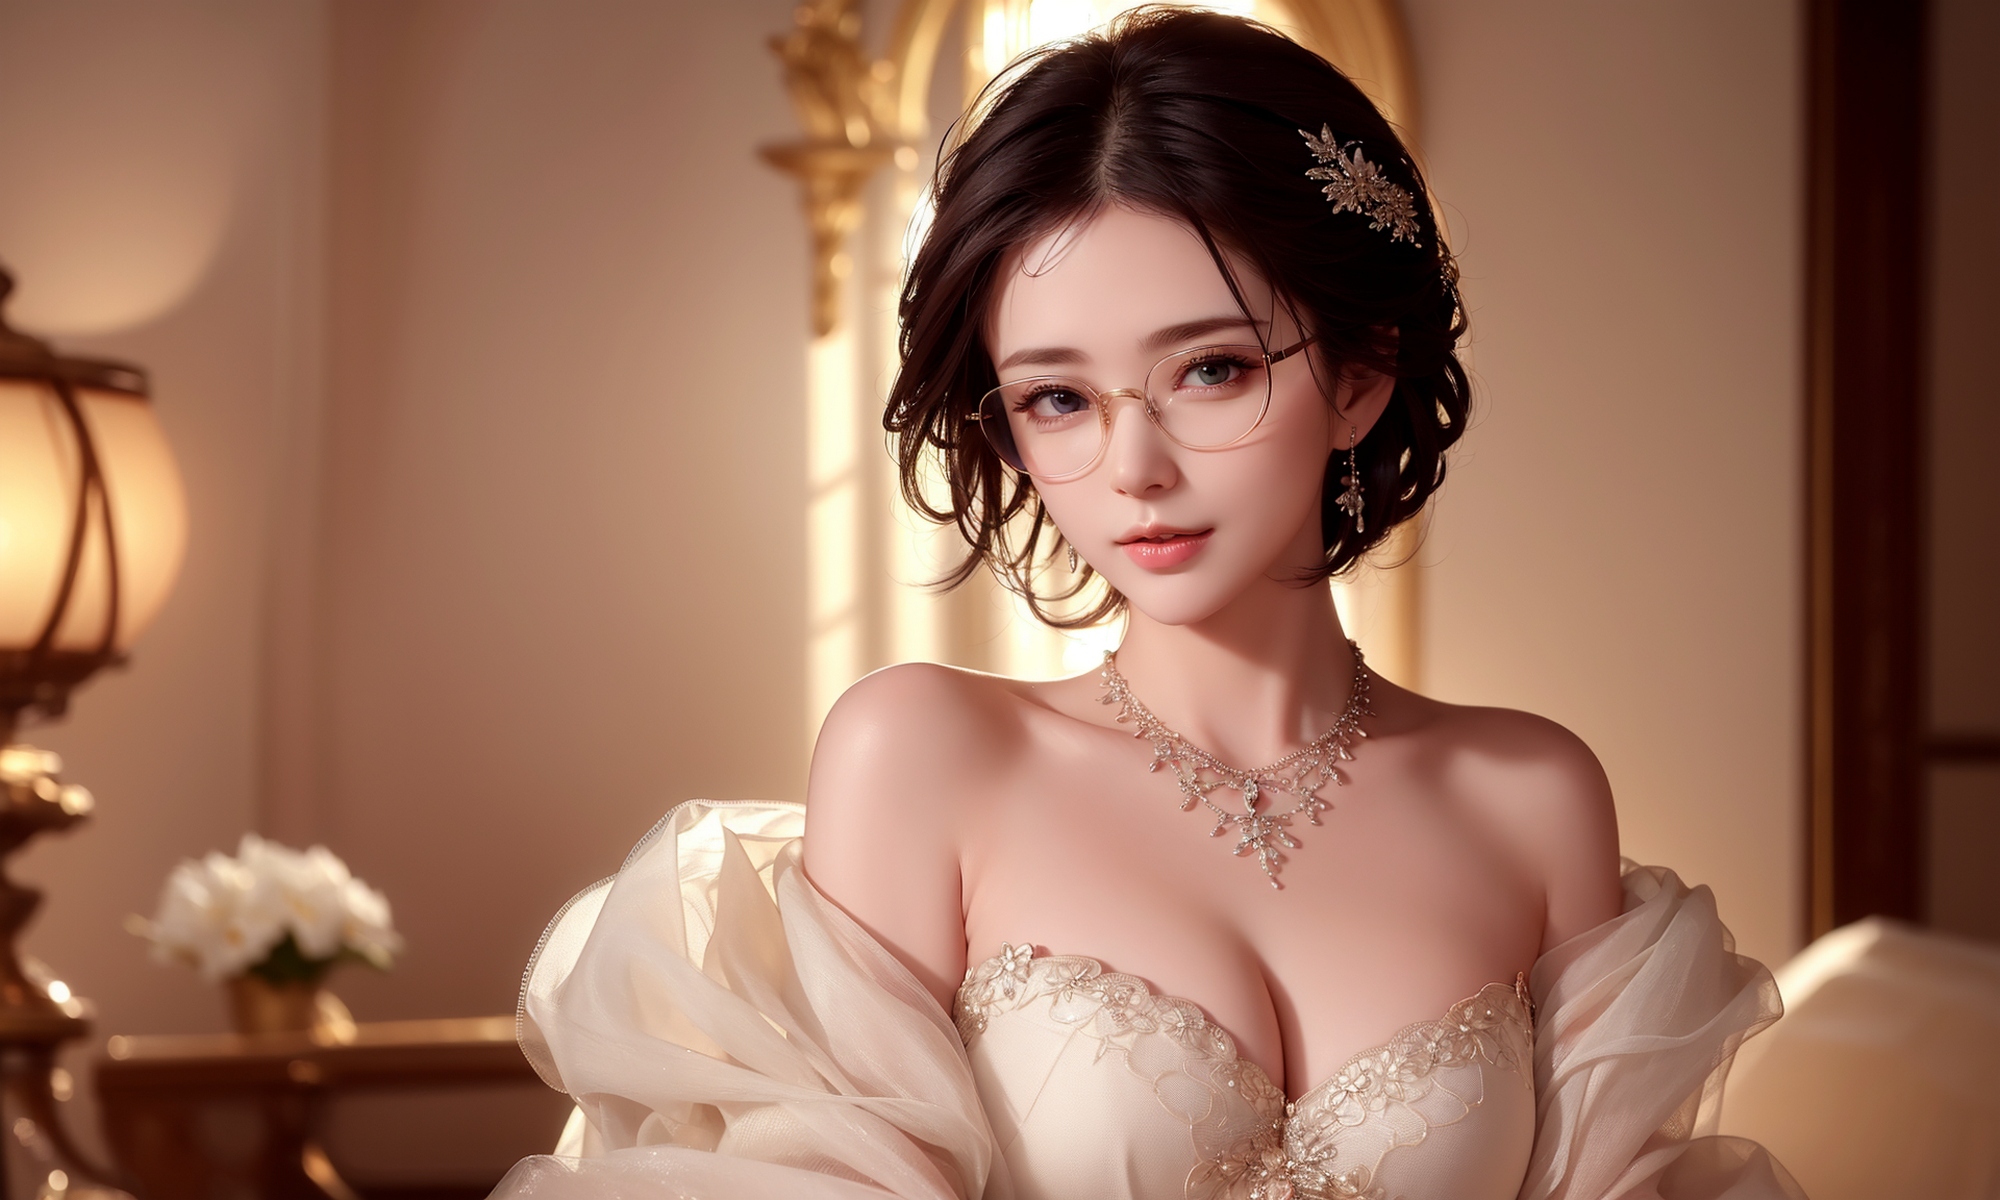 Free photo Asian woman with glasses in a wedding dress